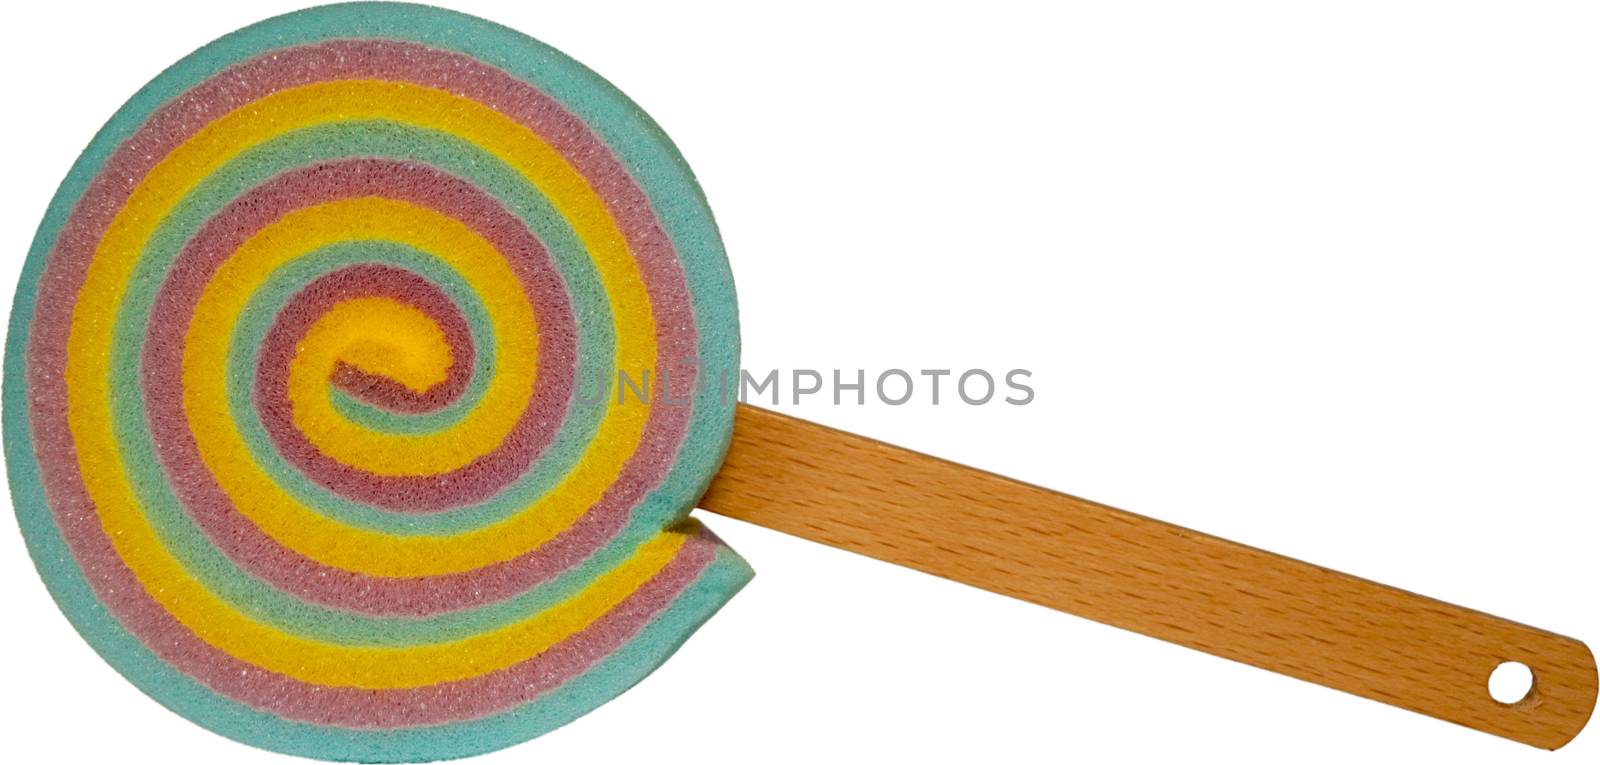 Colorful Lollipop/ Cake Sponge with Wooden Stick/ Handle -Mixed Pastel Colors - Foam Texture. Isolated.